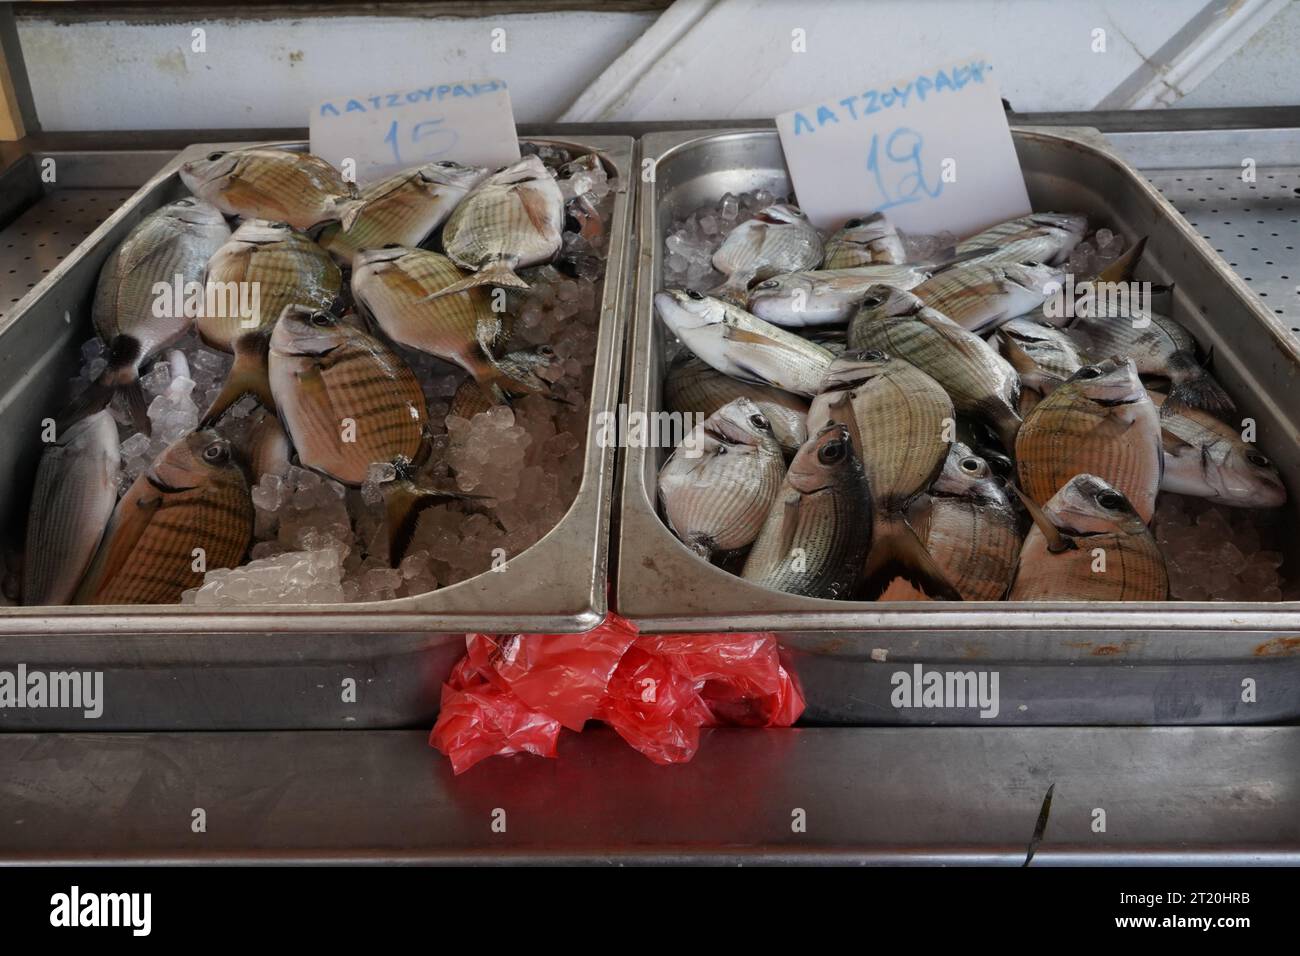 White seabream, in Latin called Diplodus sargus argus in stainless containers displayed at fish market. Stock Photo